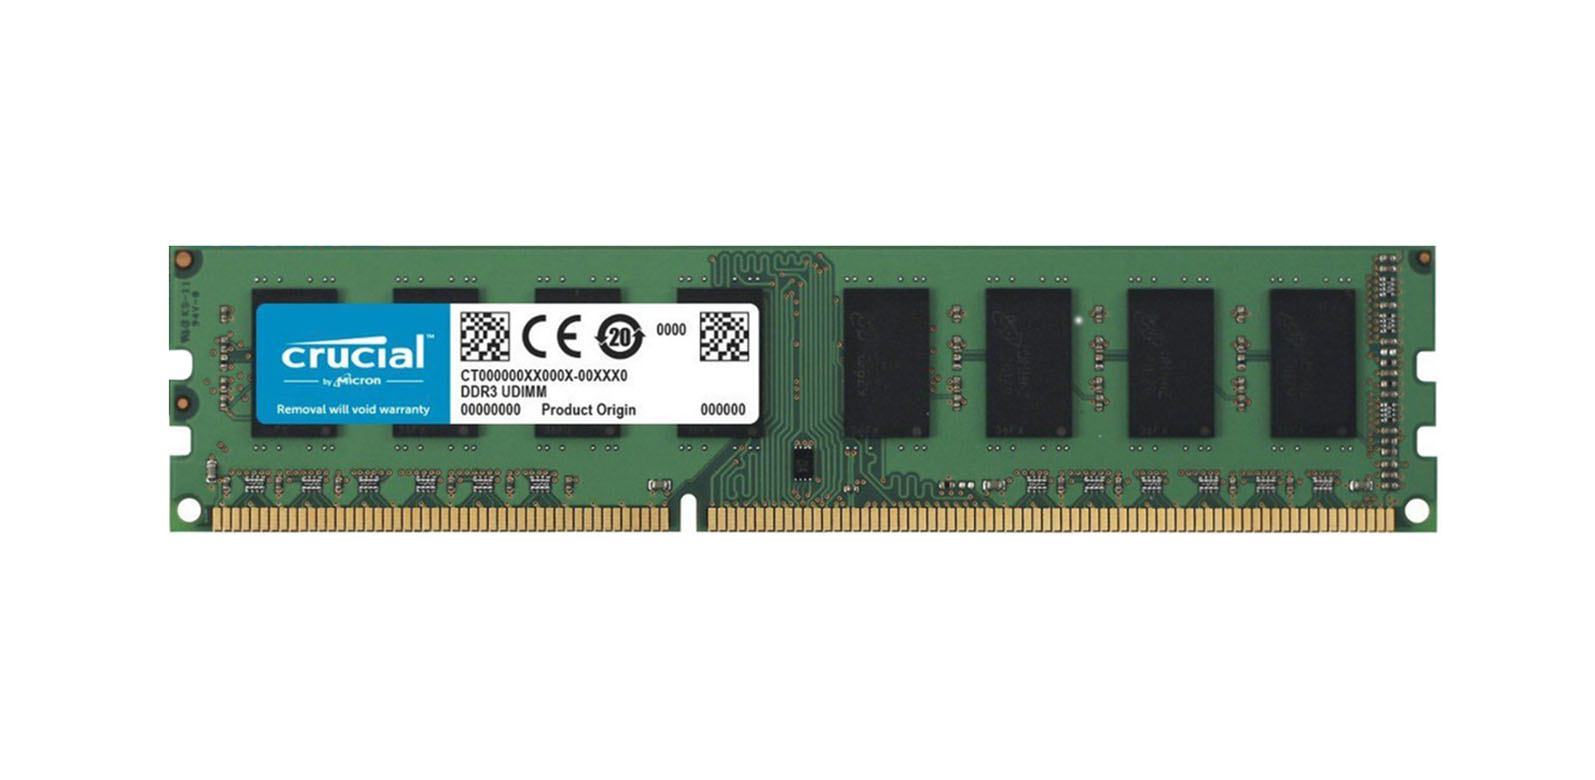 Crucial CT5318584 8GB DDR3-1600MHz PC3-12800 ECC Registered CL11 240-Pin DIMM 1.35V Low Voltage Dual Rank Very Low Profile (VLP) Memory Module Upgrade for Dell PowerEdge R410